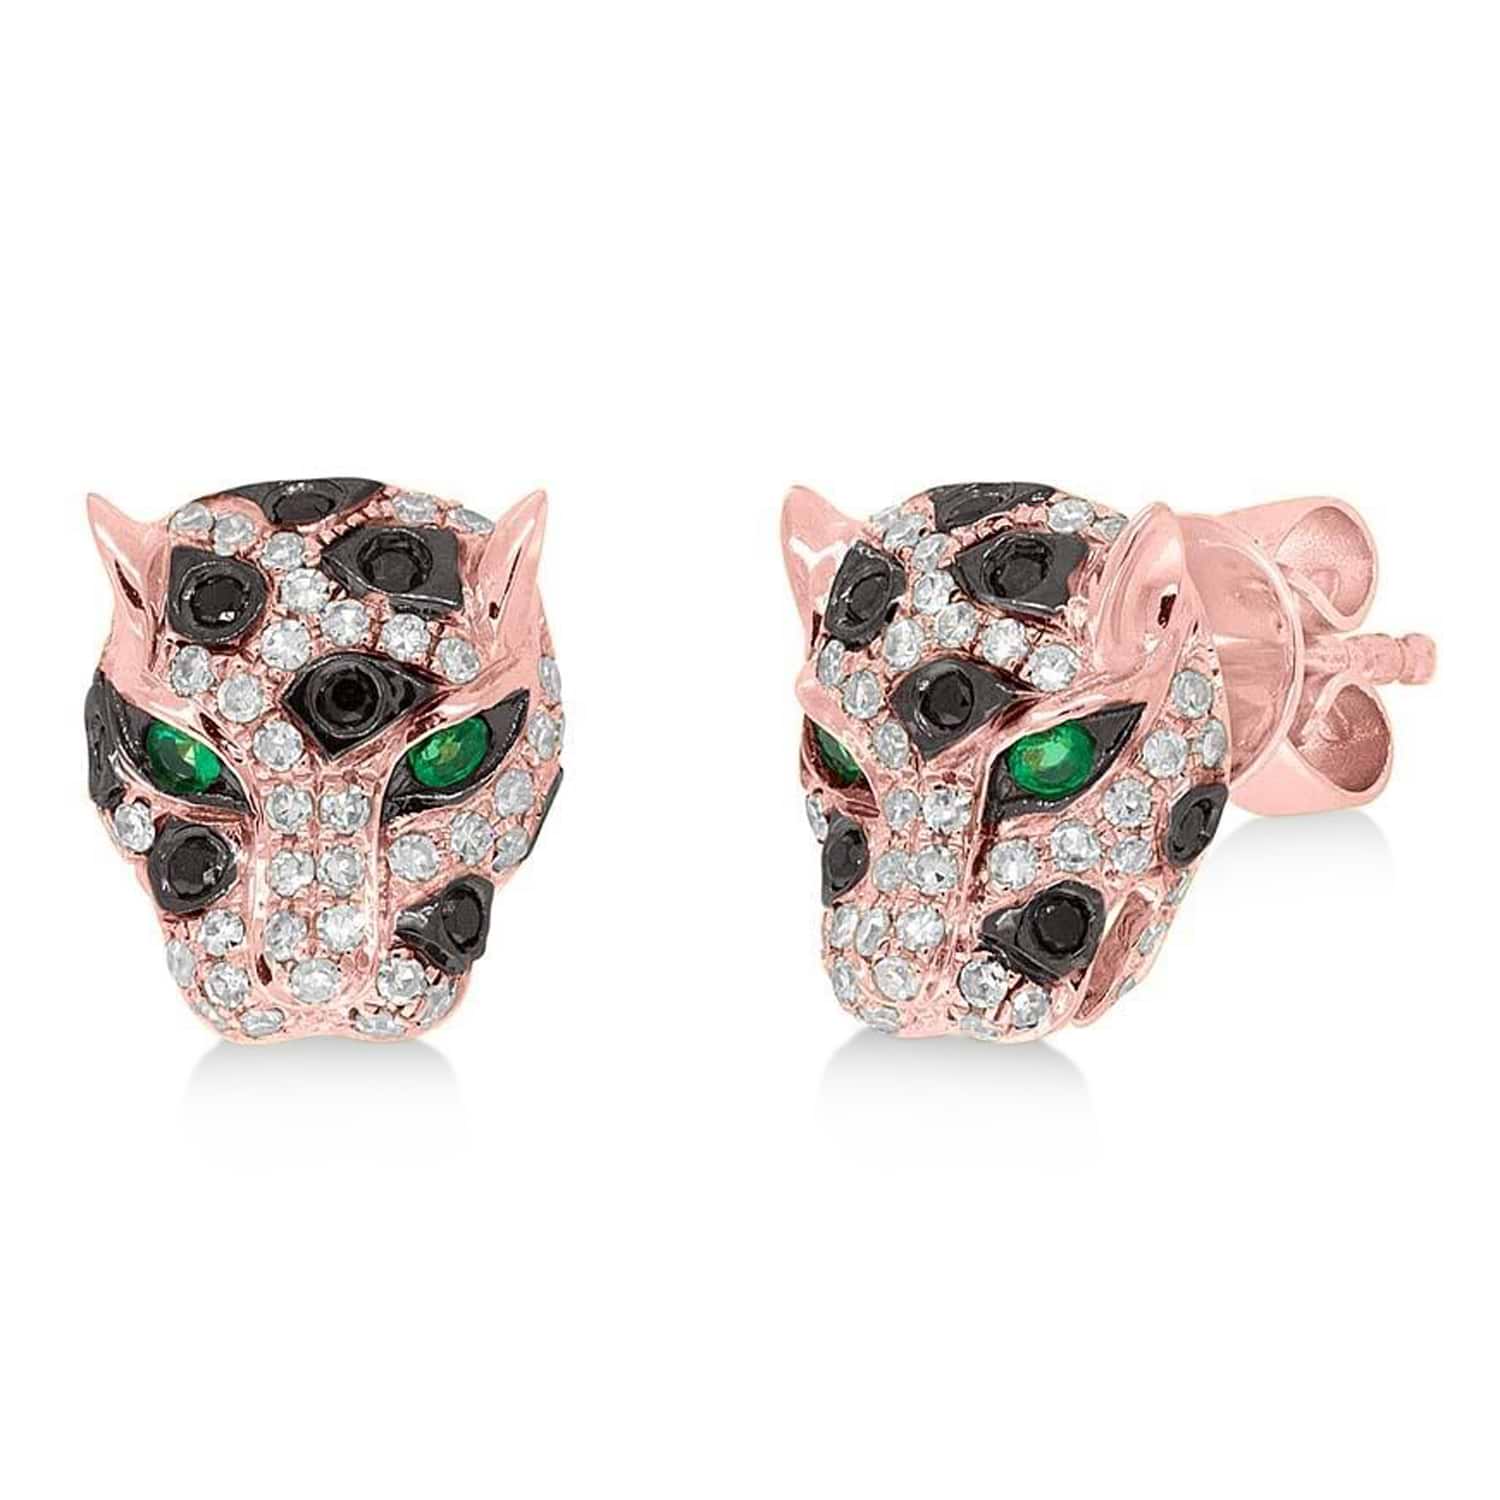 Diamond & Emerald Panther Earrings 14K Rose Gold (0.37ct)